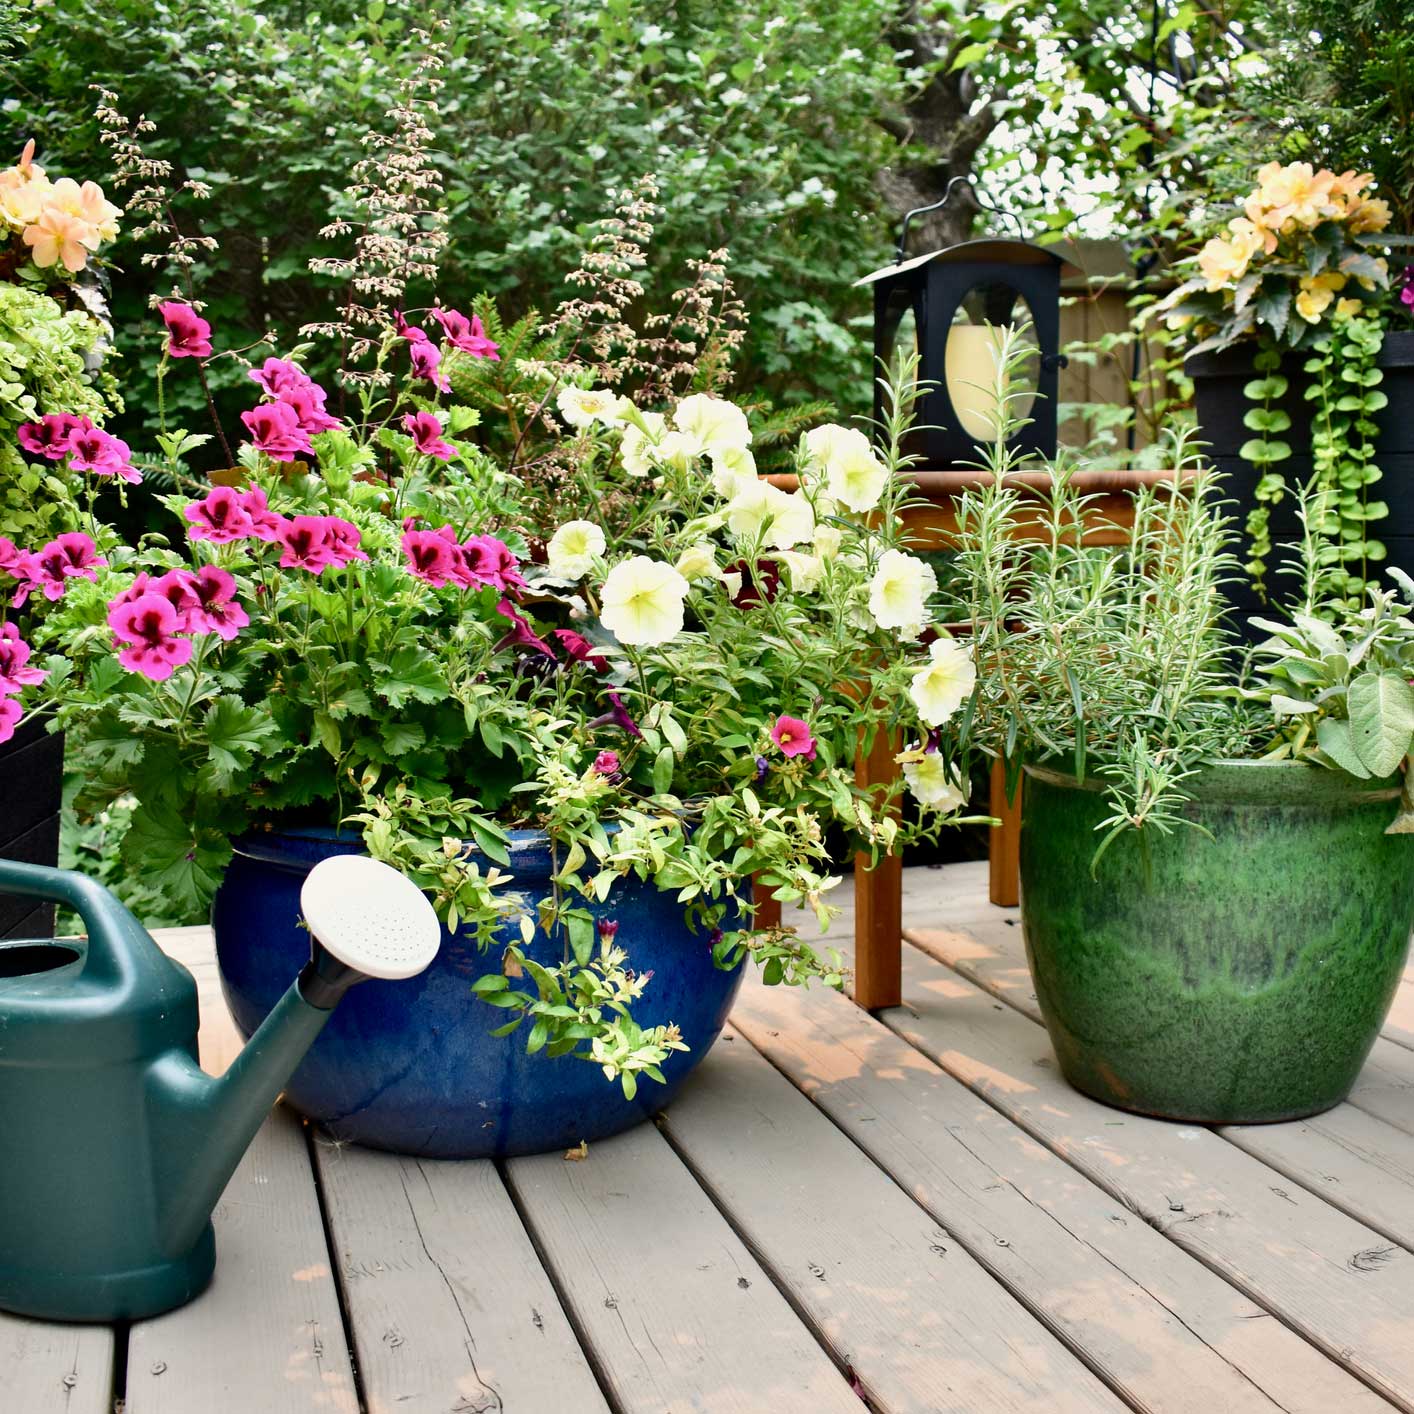 Bringing your patio to life with plants